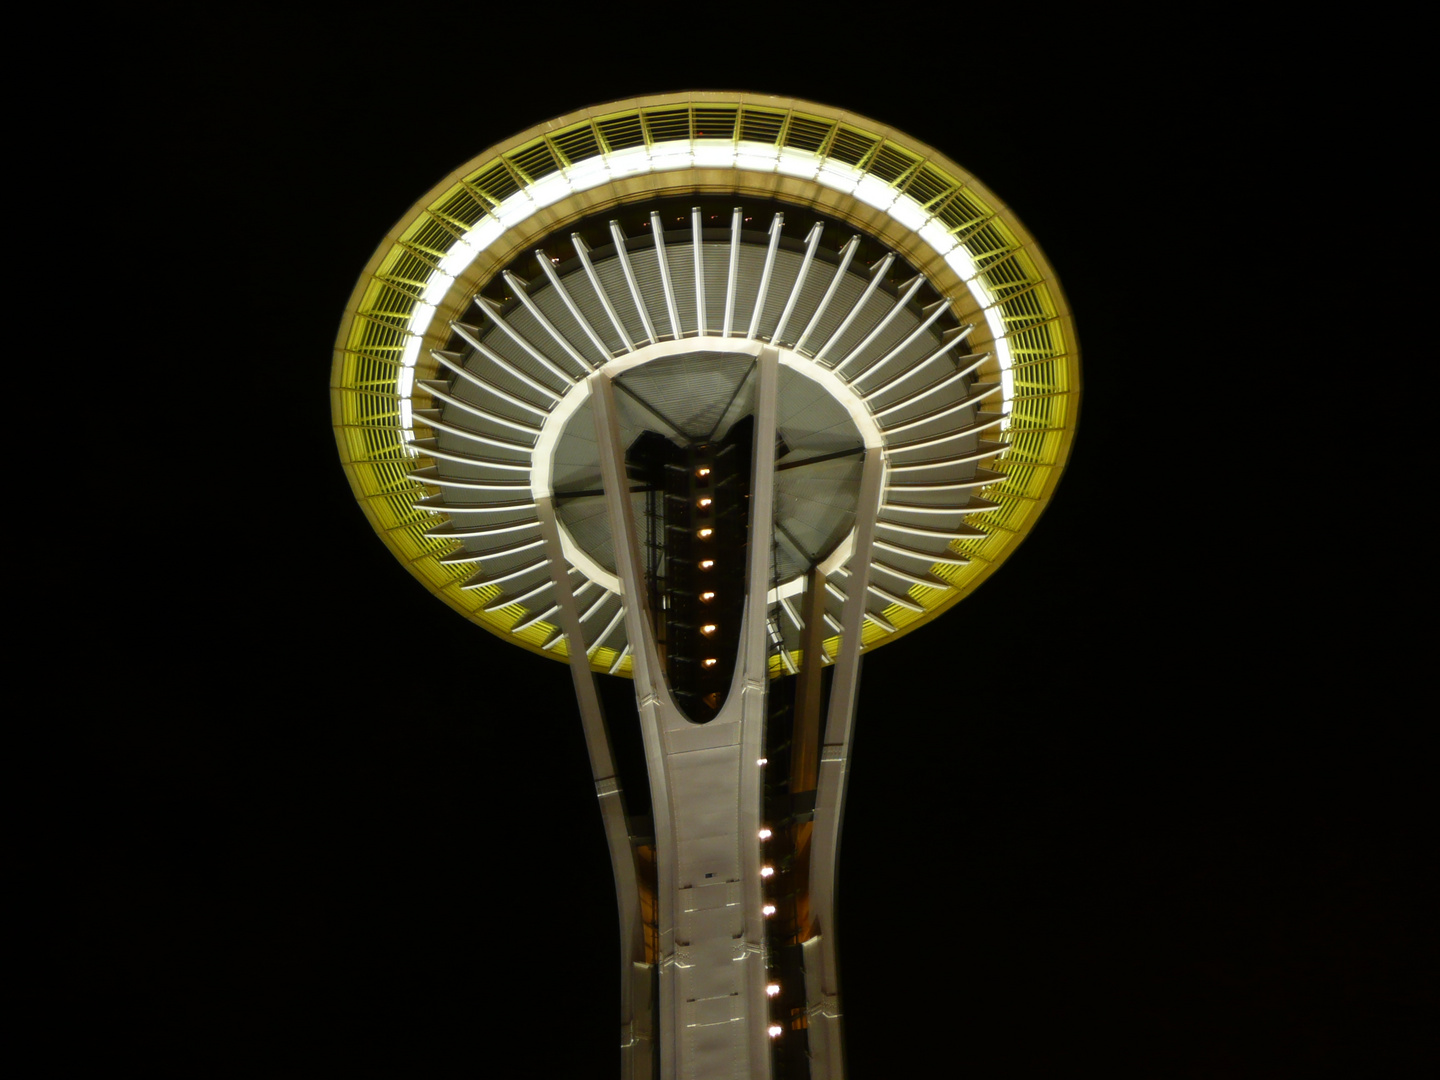 Seattle Space Needle by night